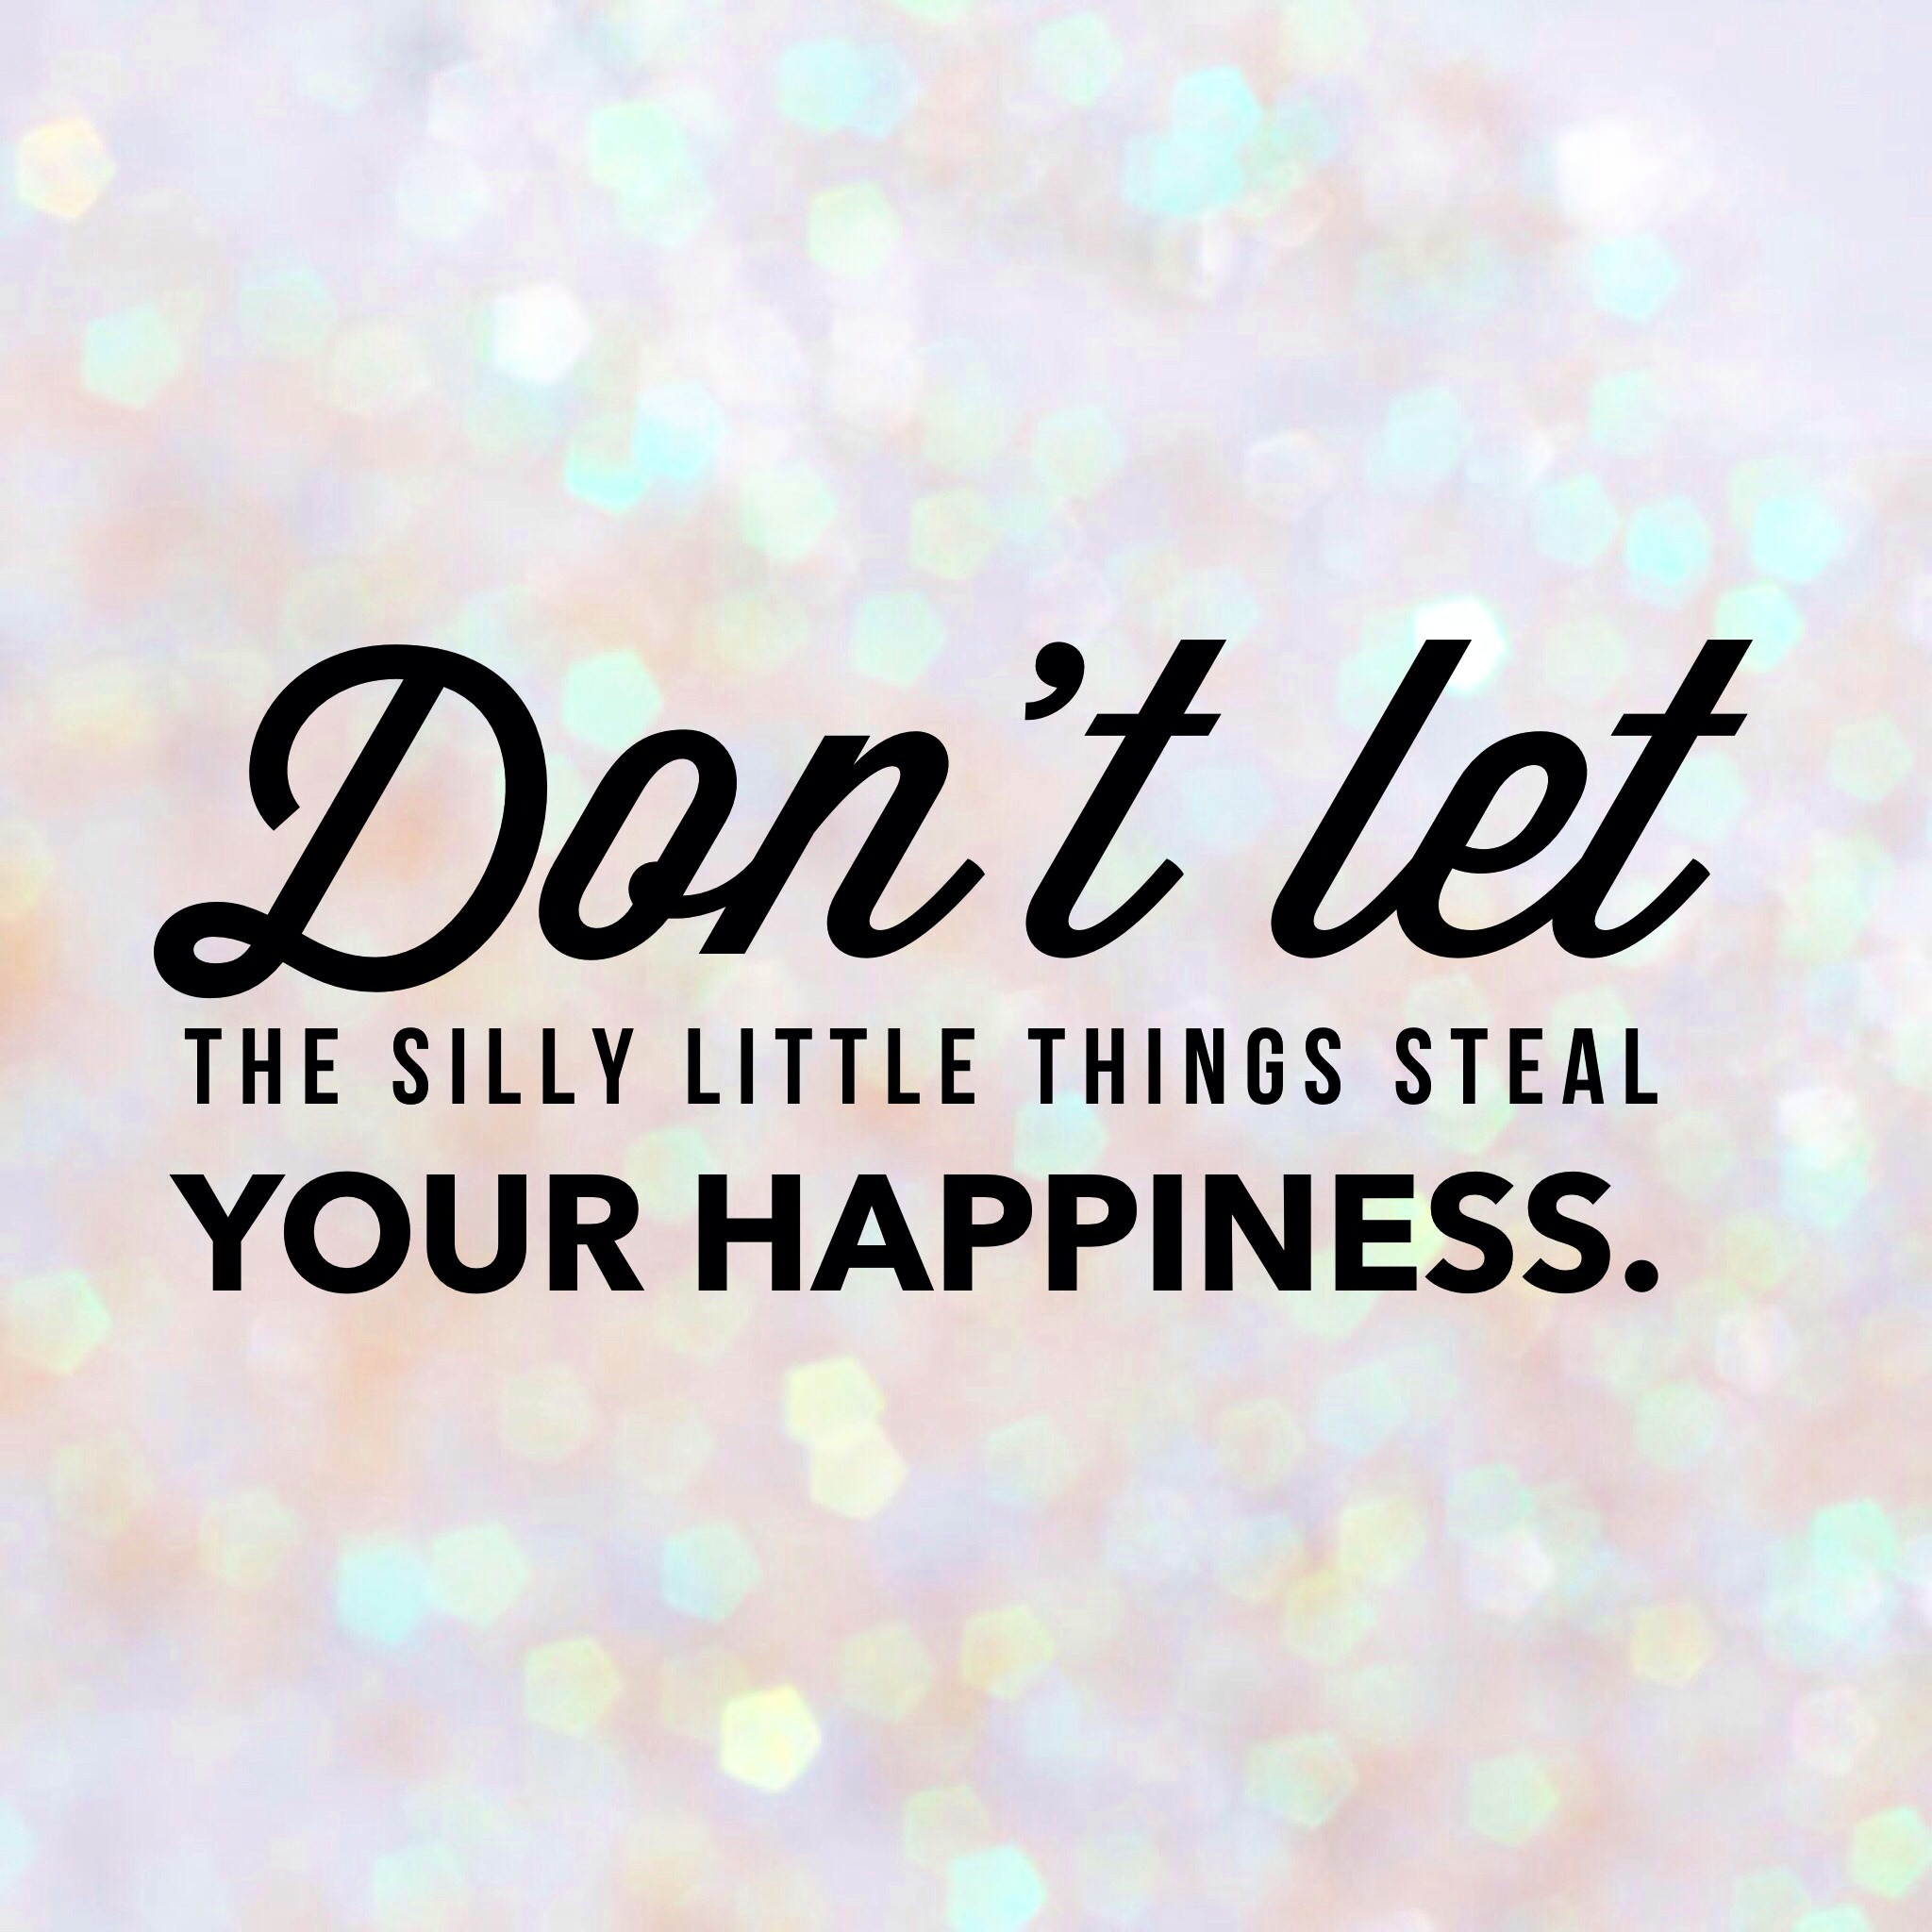 Quote On Life And Happiness
 8 Ways to Stop the Silly Things from Stealing Your Happiness